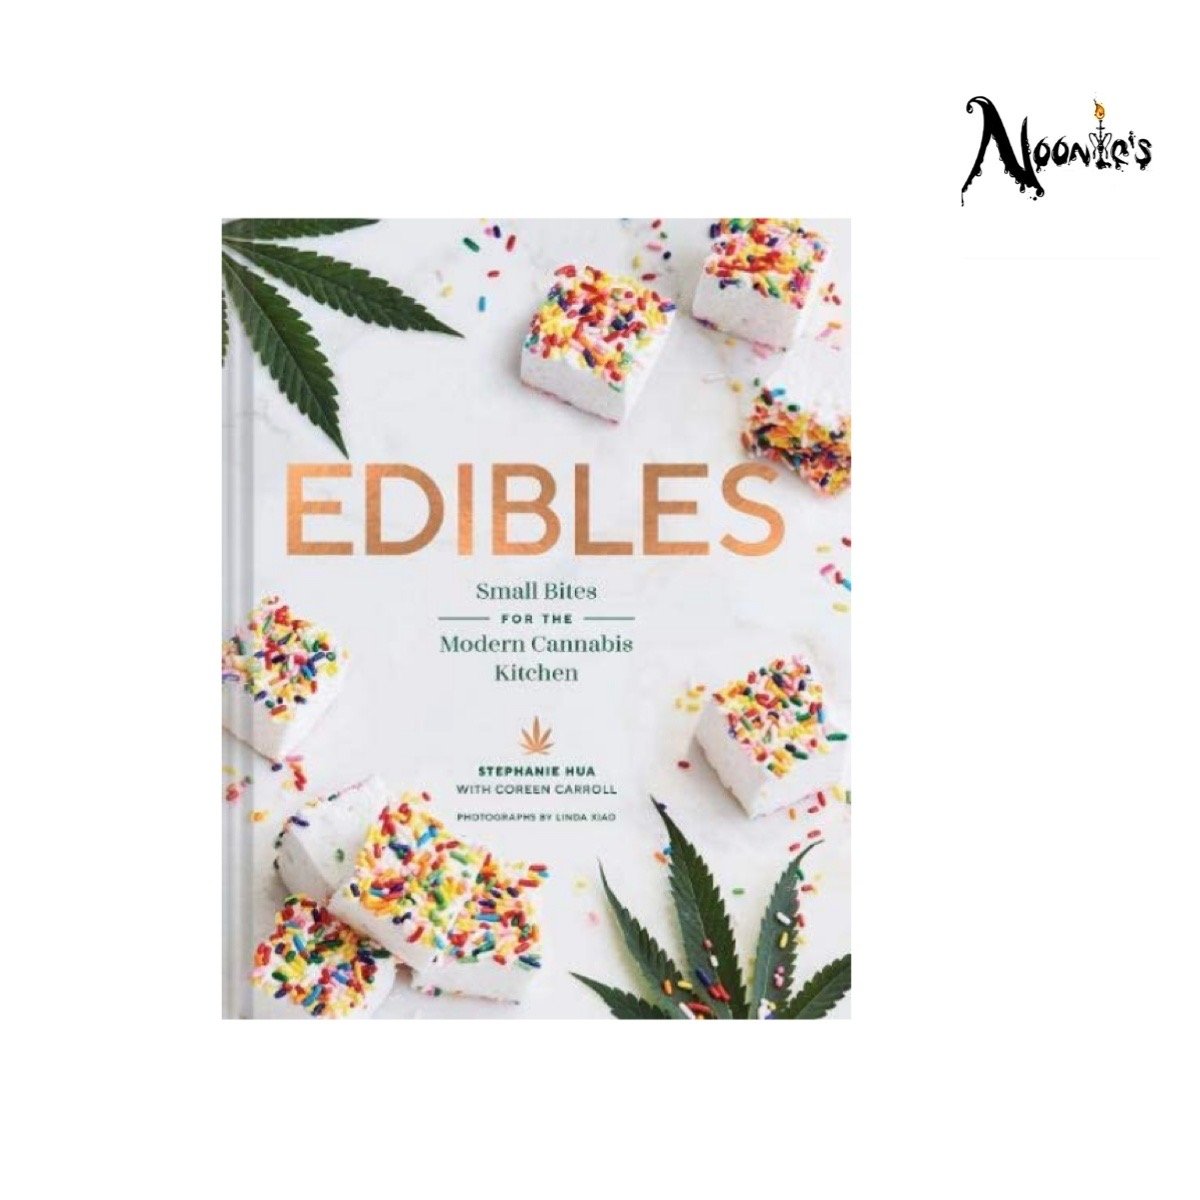 Image of The cookbook for edibles